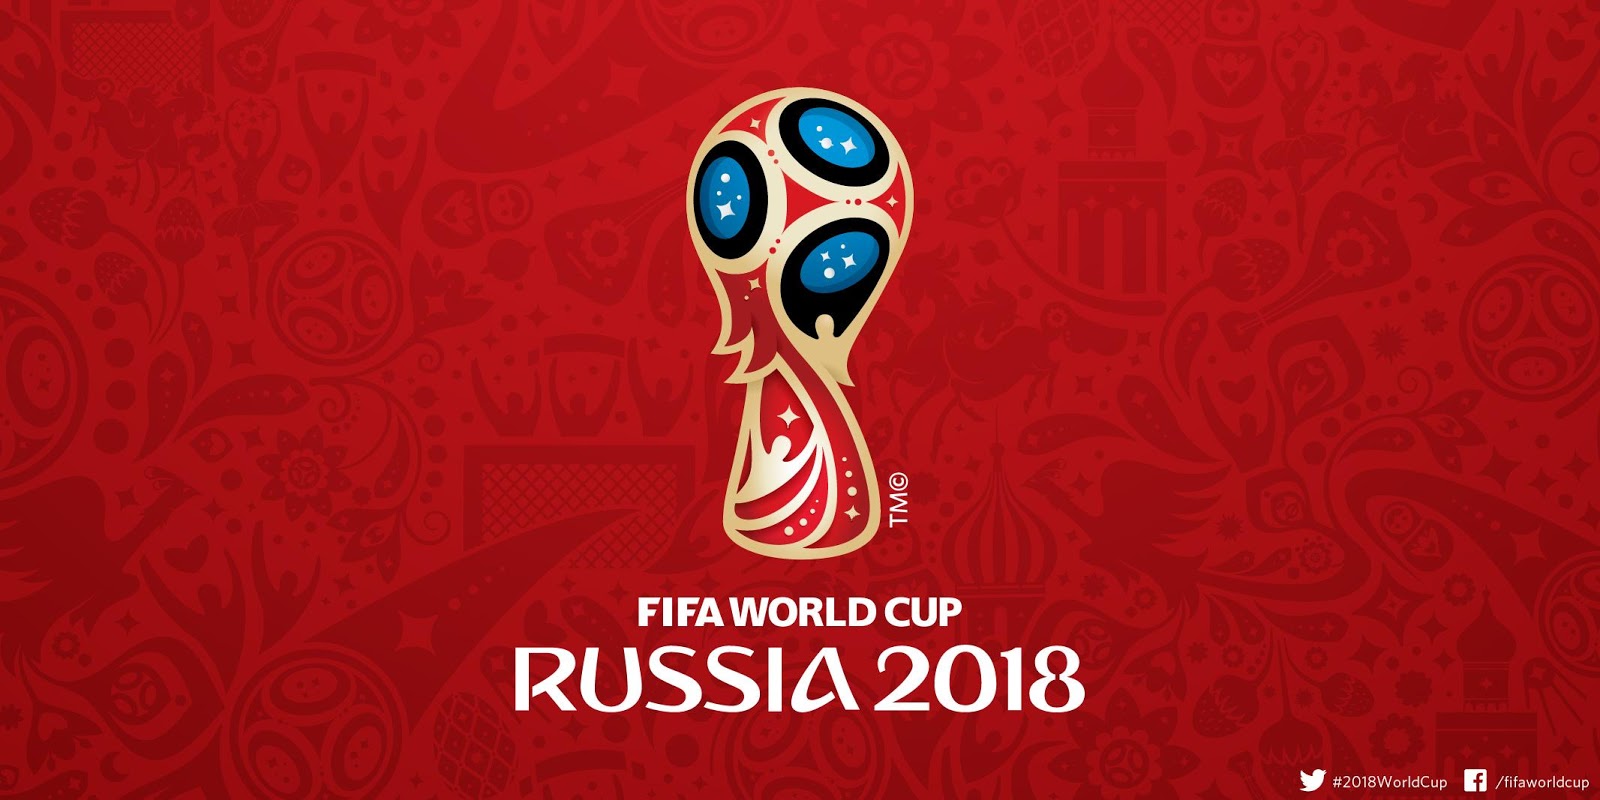 2018 Russia Fifa World Cup Logo Revealed Footy Headlines